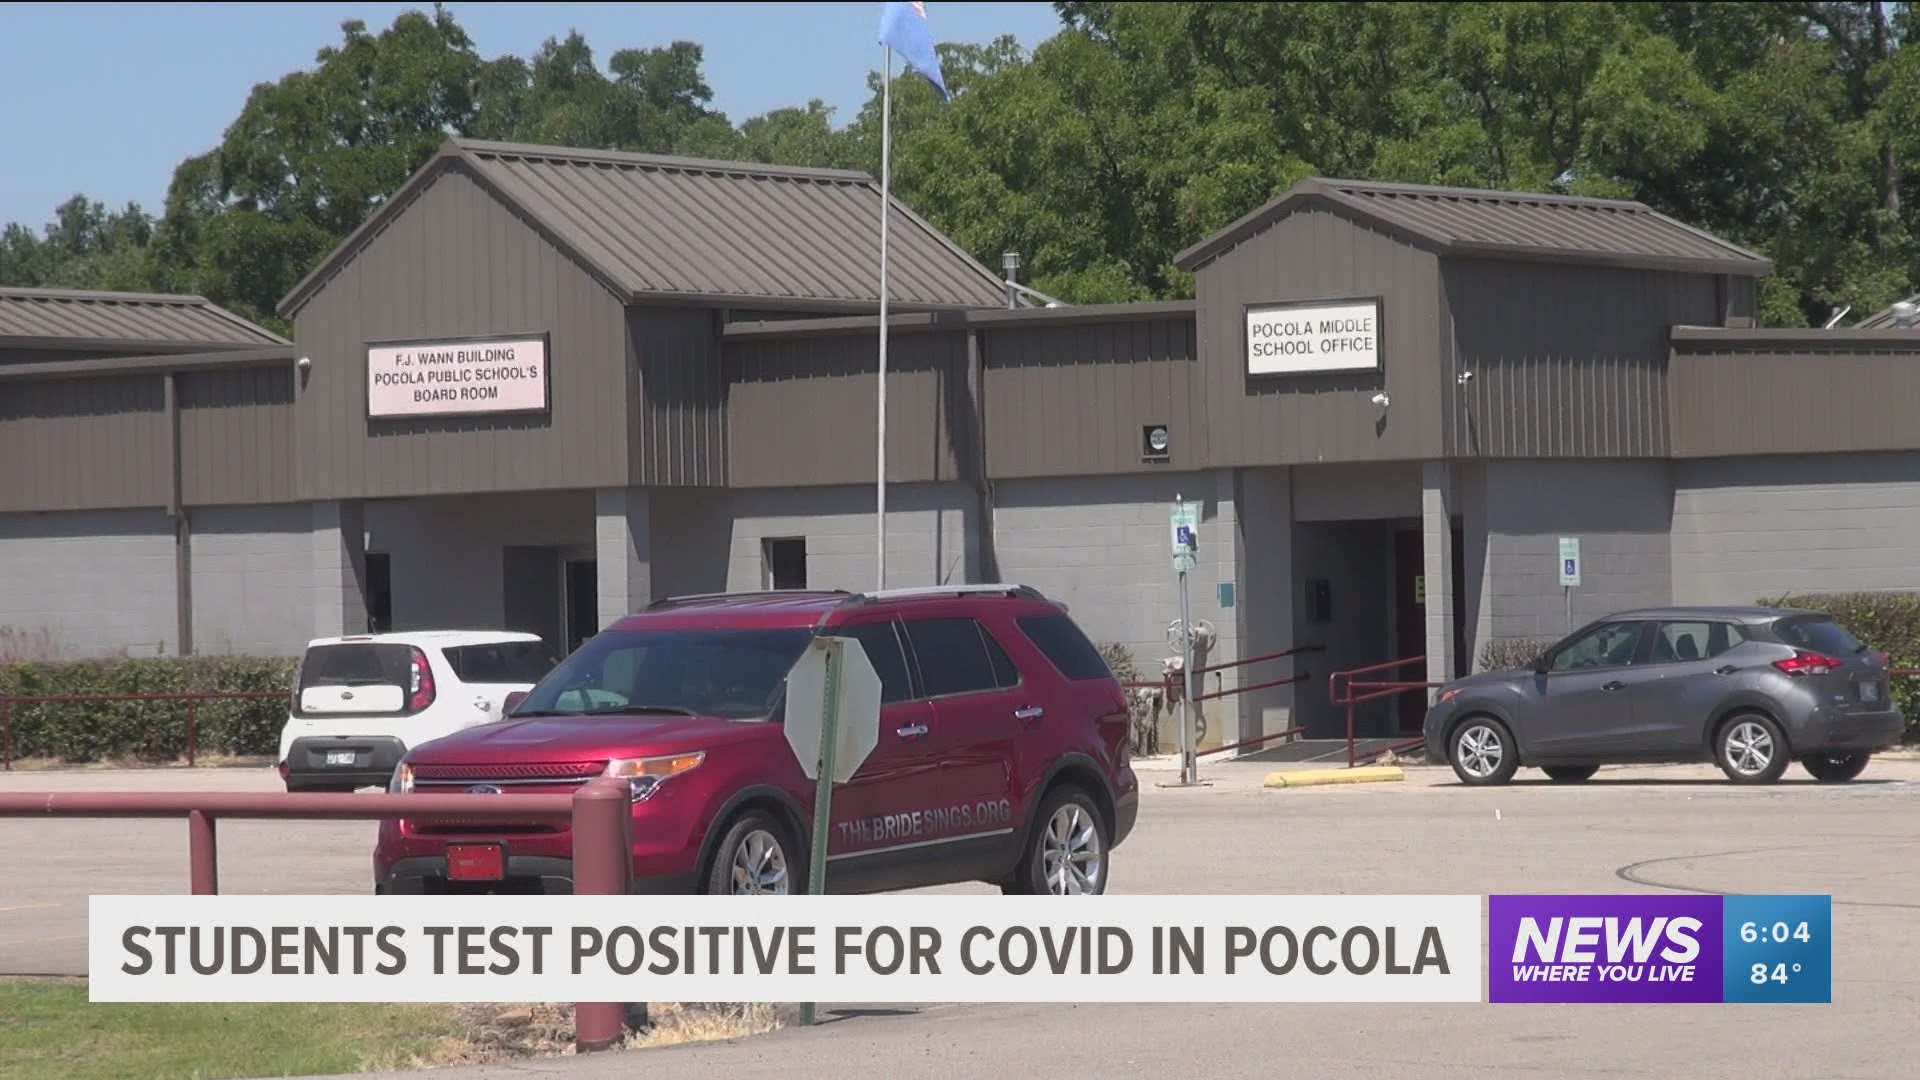 Pocola Public Schools are reaching out to parents and guardians after two students from the district tested positive for COVID-19. https://bit.ly/31fKqao